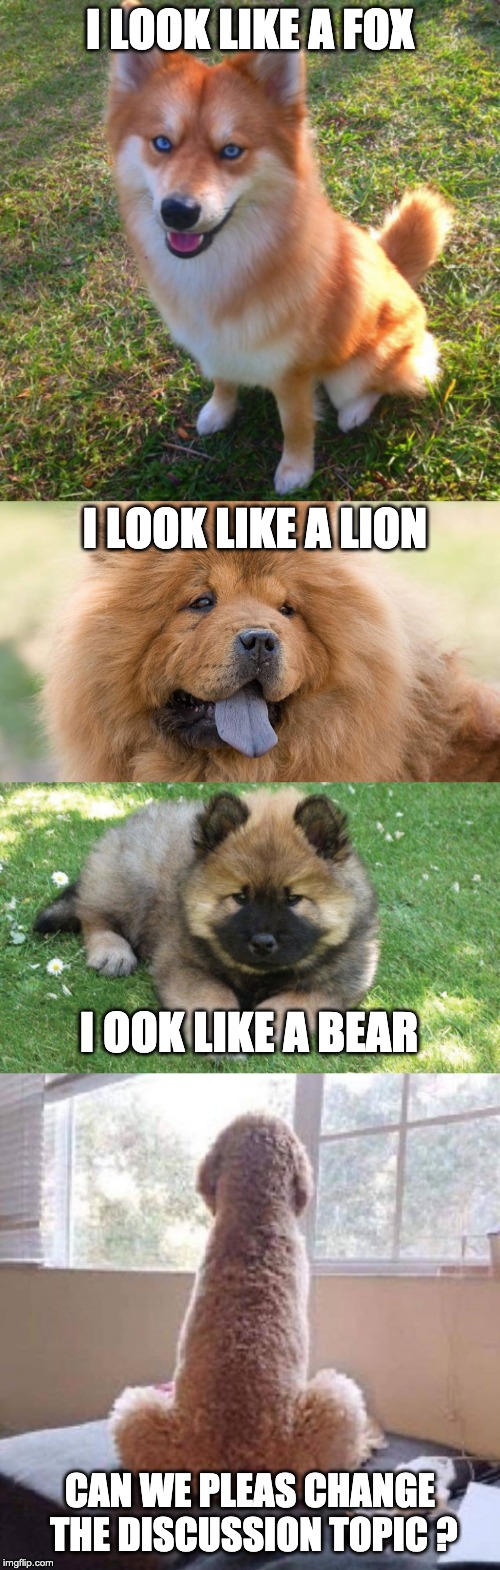 Dog looks | I LOOK LIKE A FOX; I LOOK LIKE A LION; I OOK LIKE A BEAR; CAN WE PLEAS CHANGE THE DISCUSSION TOPIC ? | image tagged in dogs,dog,funny,fun,meme,fox | made w/ Imgflip meme maker